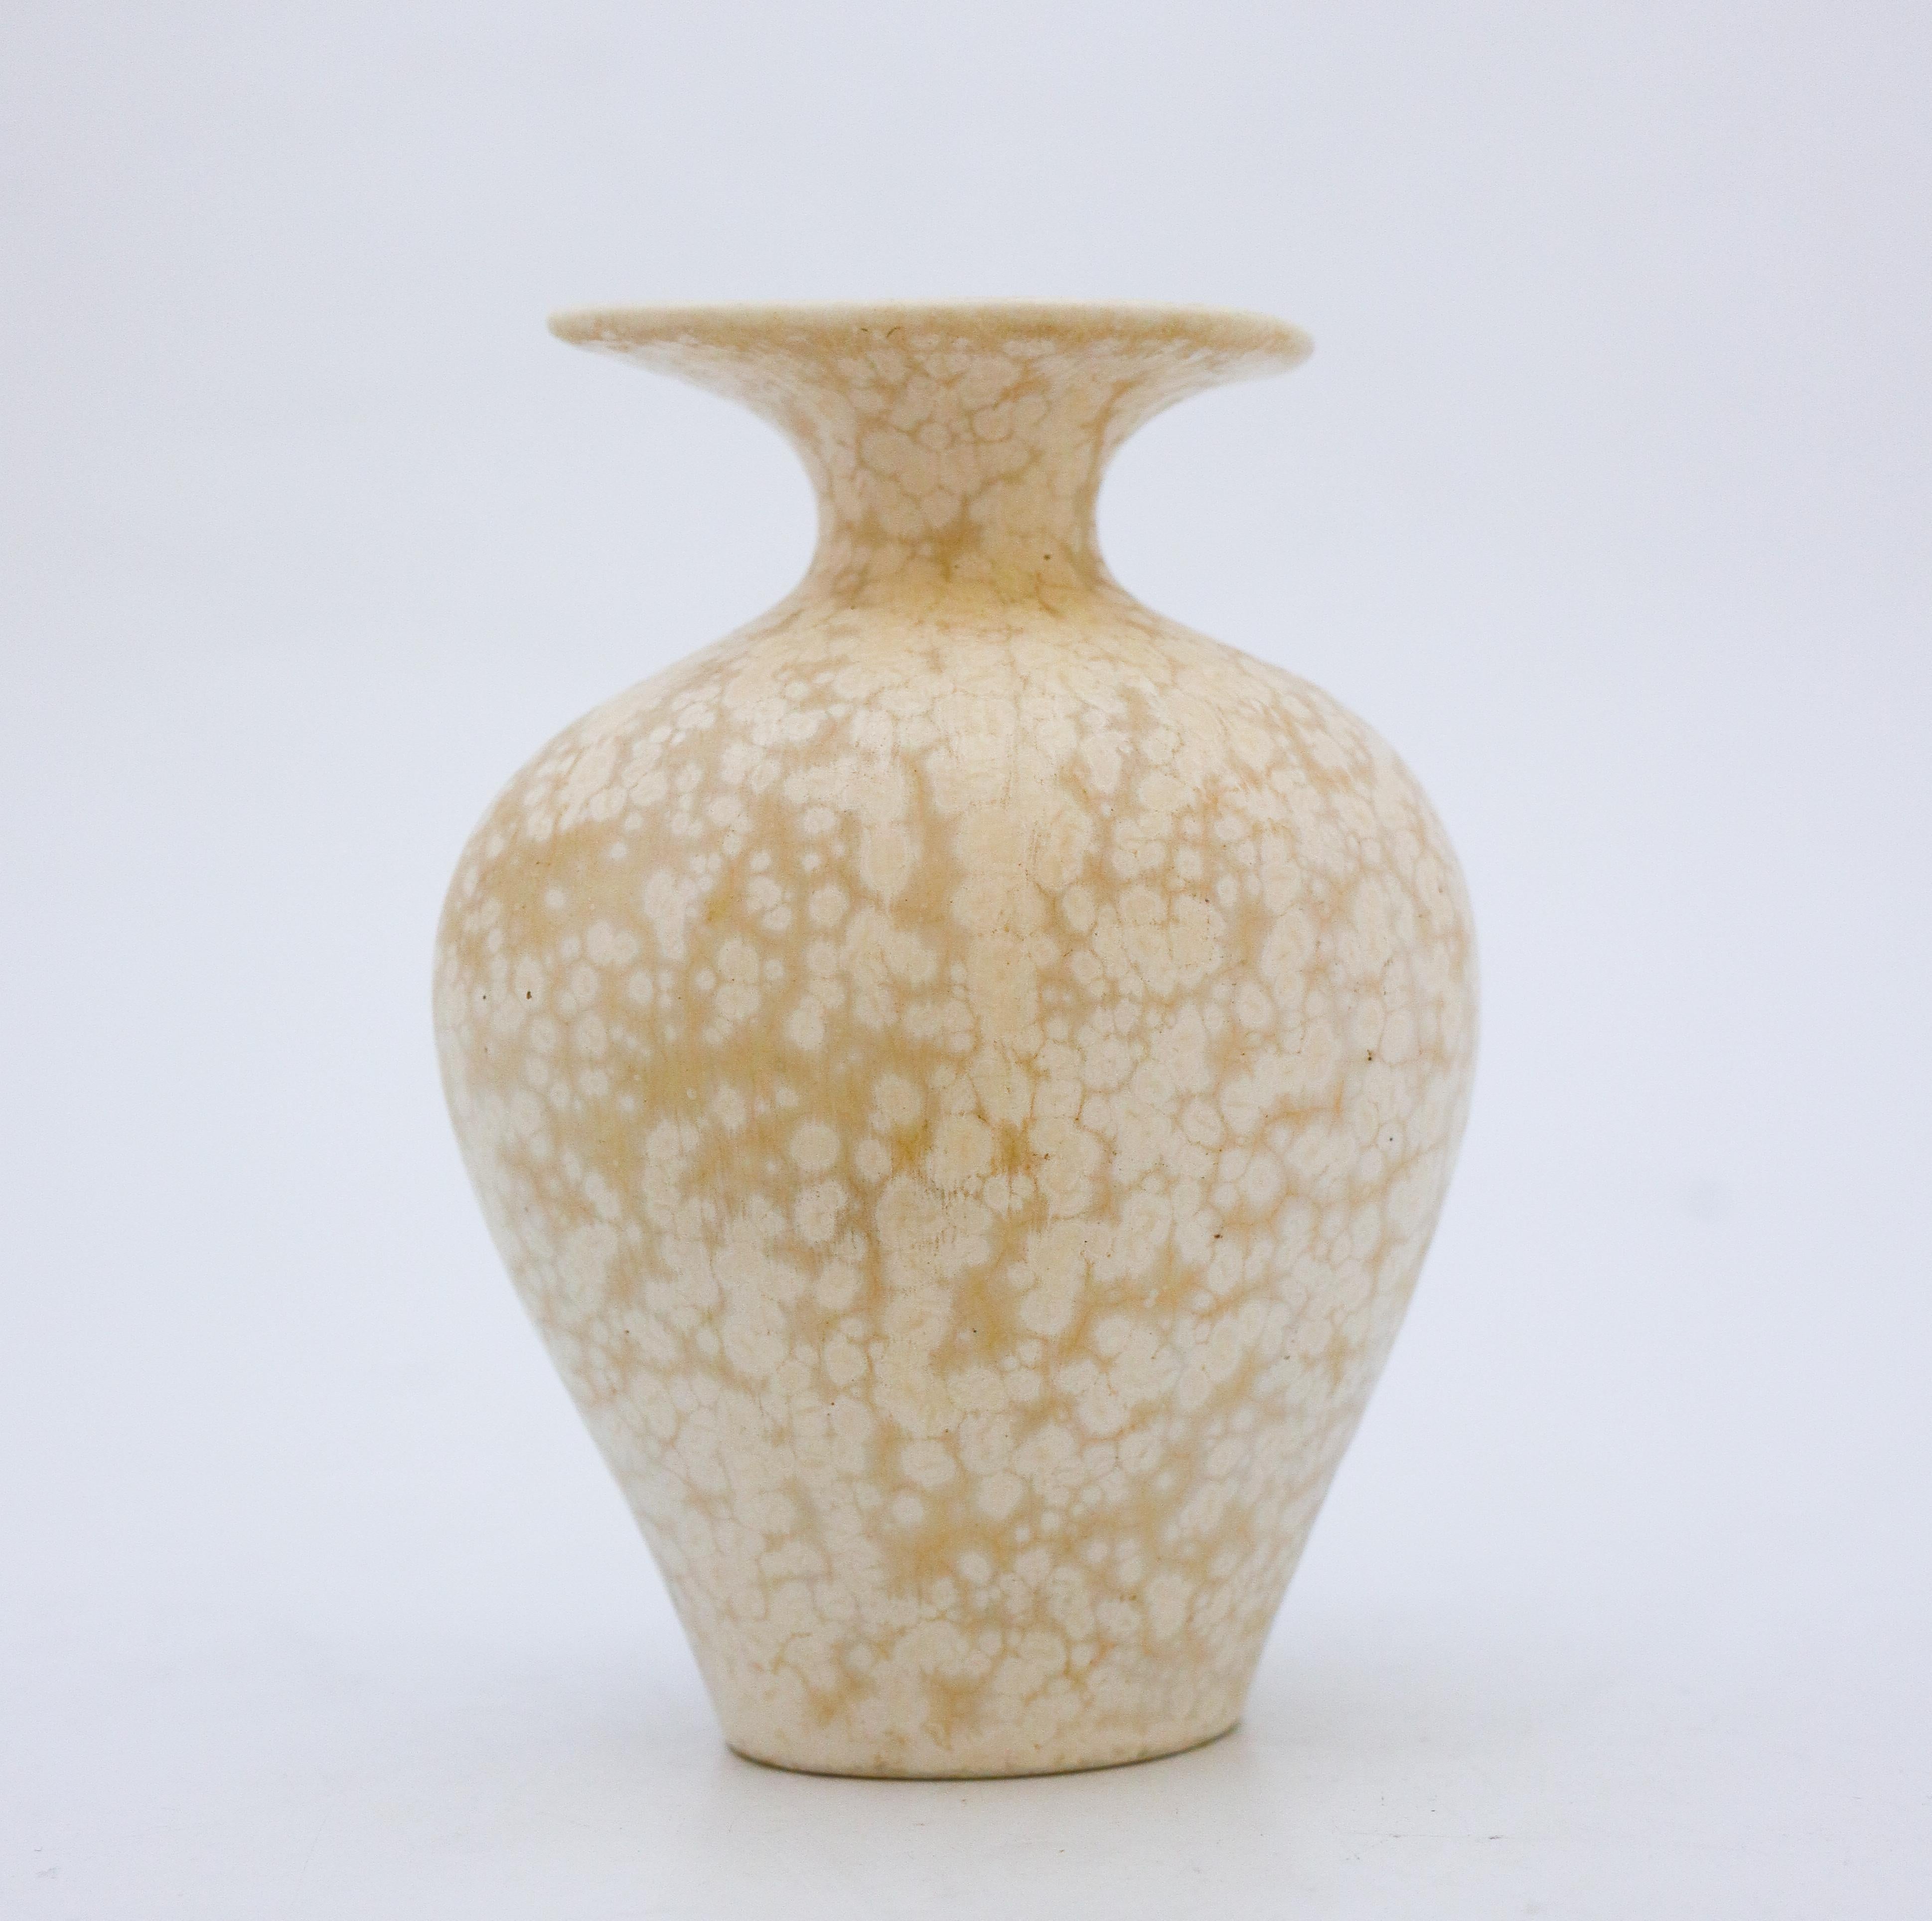 A vase with a lovely white/creme speckled glaze designed by Gunnar Nylund at Rörstrand, it´s 12.5 cm (5) high. It´s in very good condition except from some minor marks in the glaze. 

Gunnar Nylund was born in Paris 1904 with parents who worked as